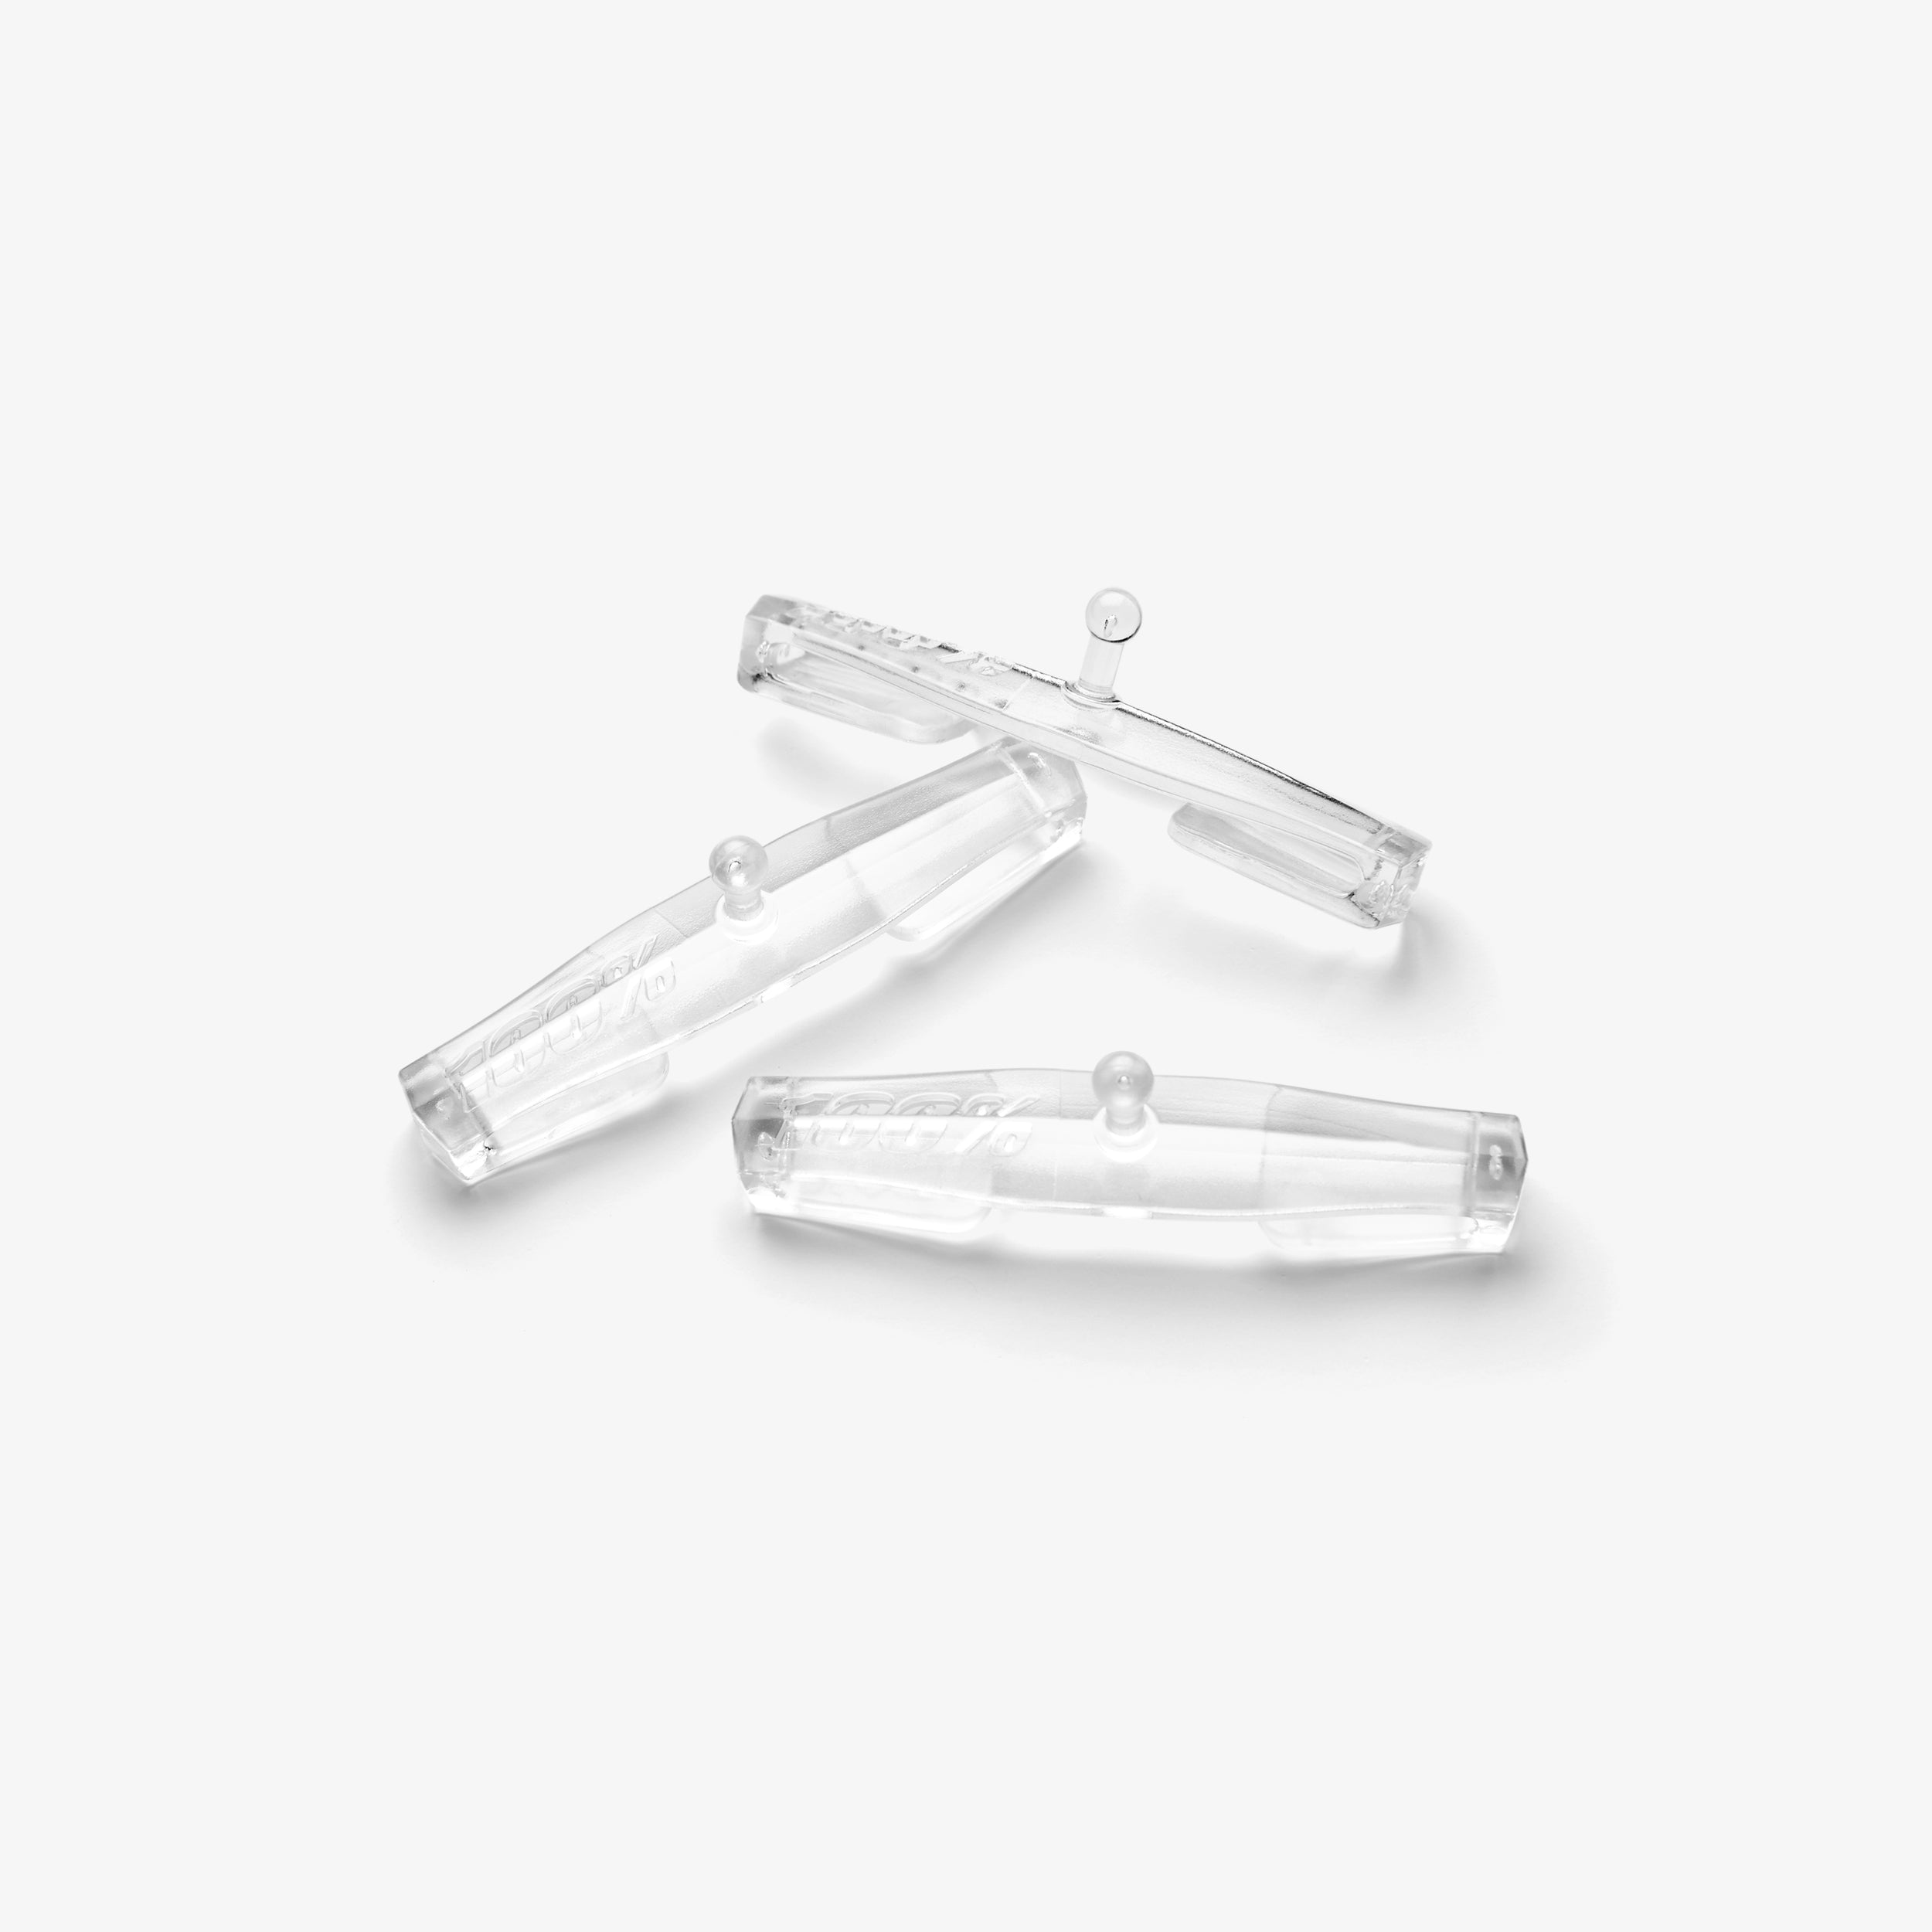 Tear-off Strap Pin - (pack of 3)